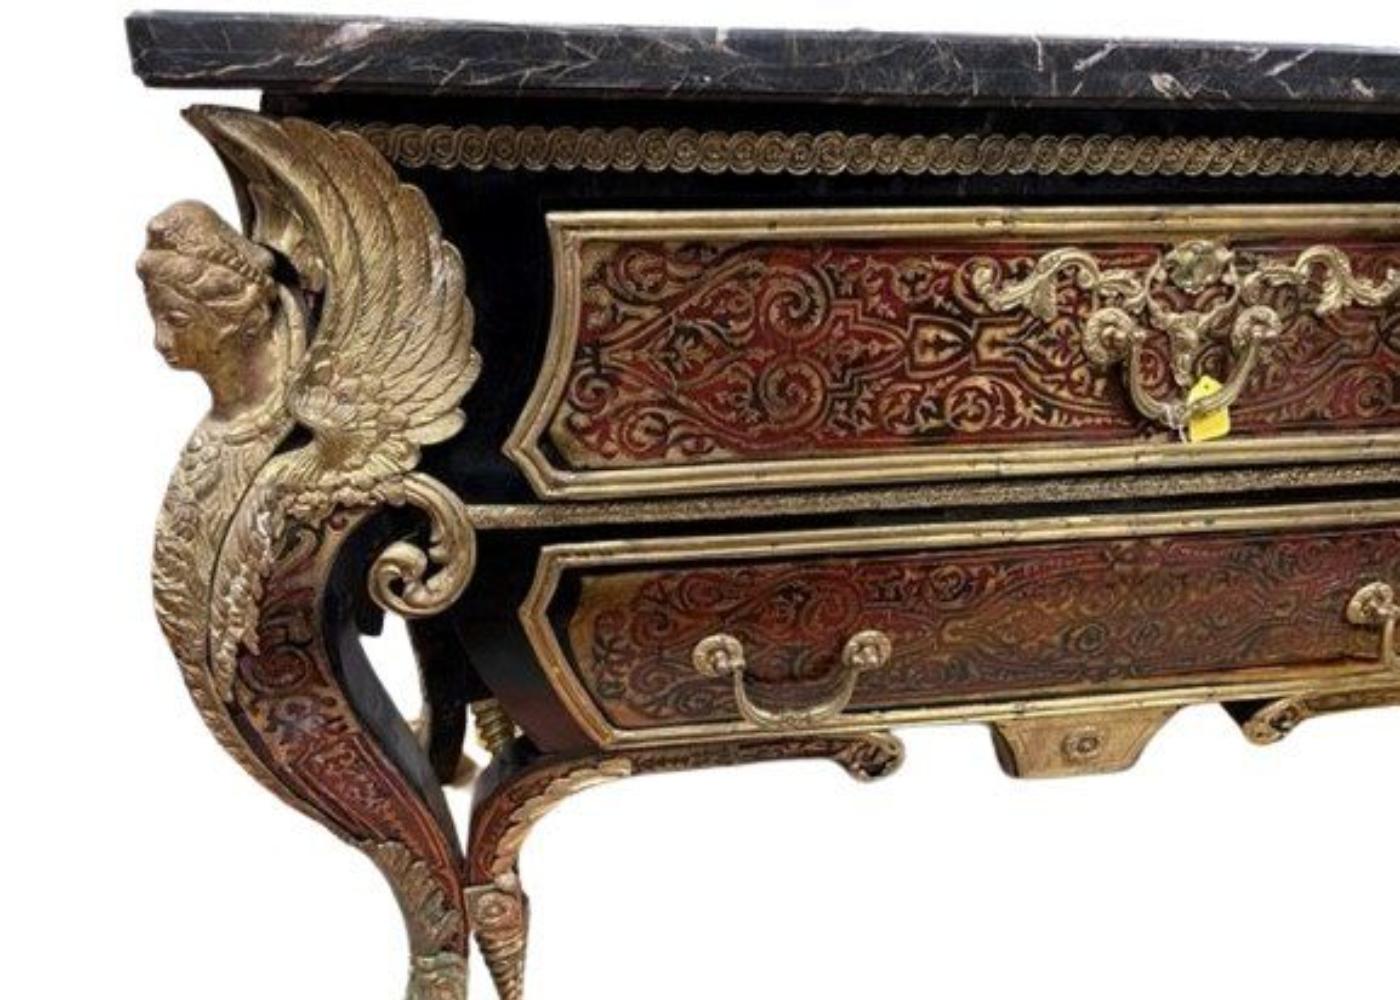 Amazing French Gilt Bronze-Mounted Tortoise Shell Boulle Drawer Table. Drawers on both sides, one side is operational and the other is fixed. It has beautiful bronze angels on the sides of the legs. The marble top is not included.35